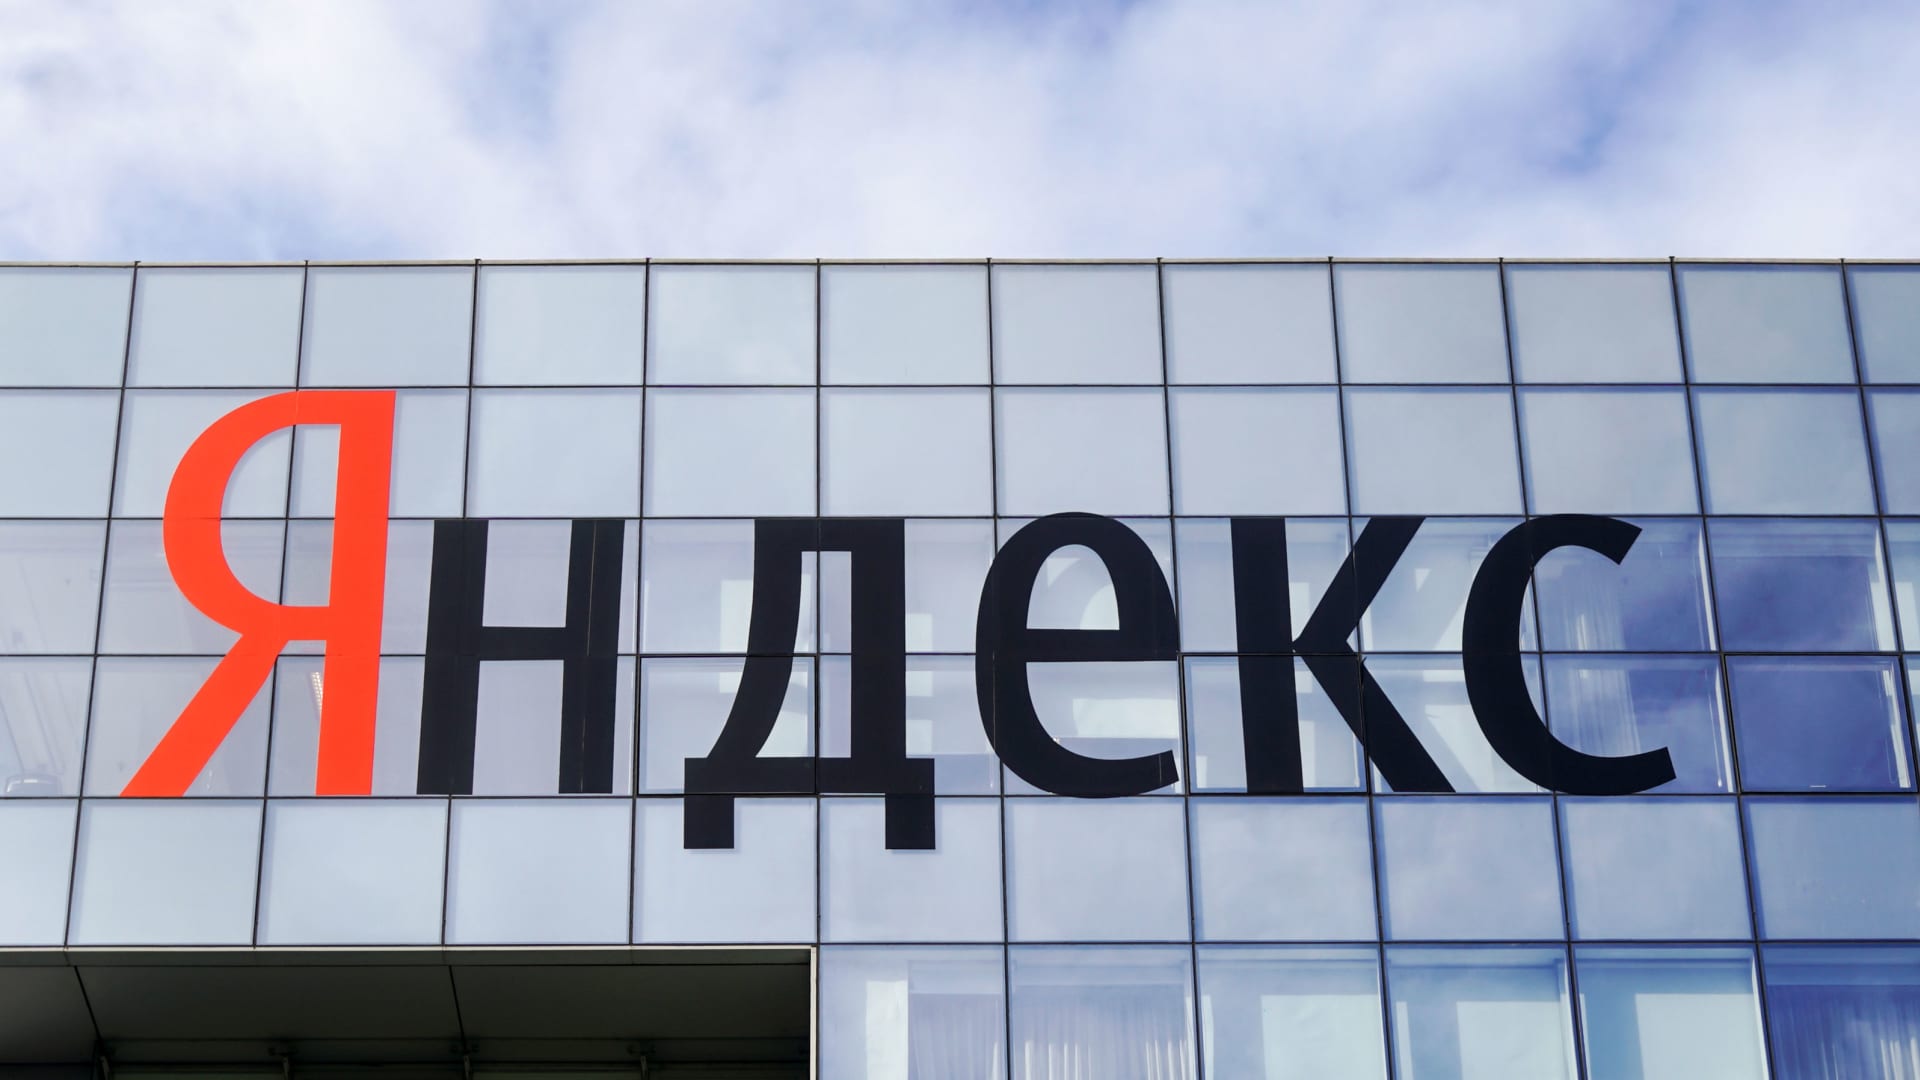 The logo of Russian internet group Yandex is pictured at the company's headquarter in Moscow.